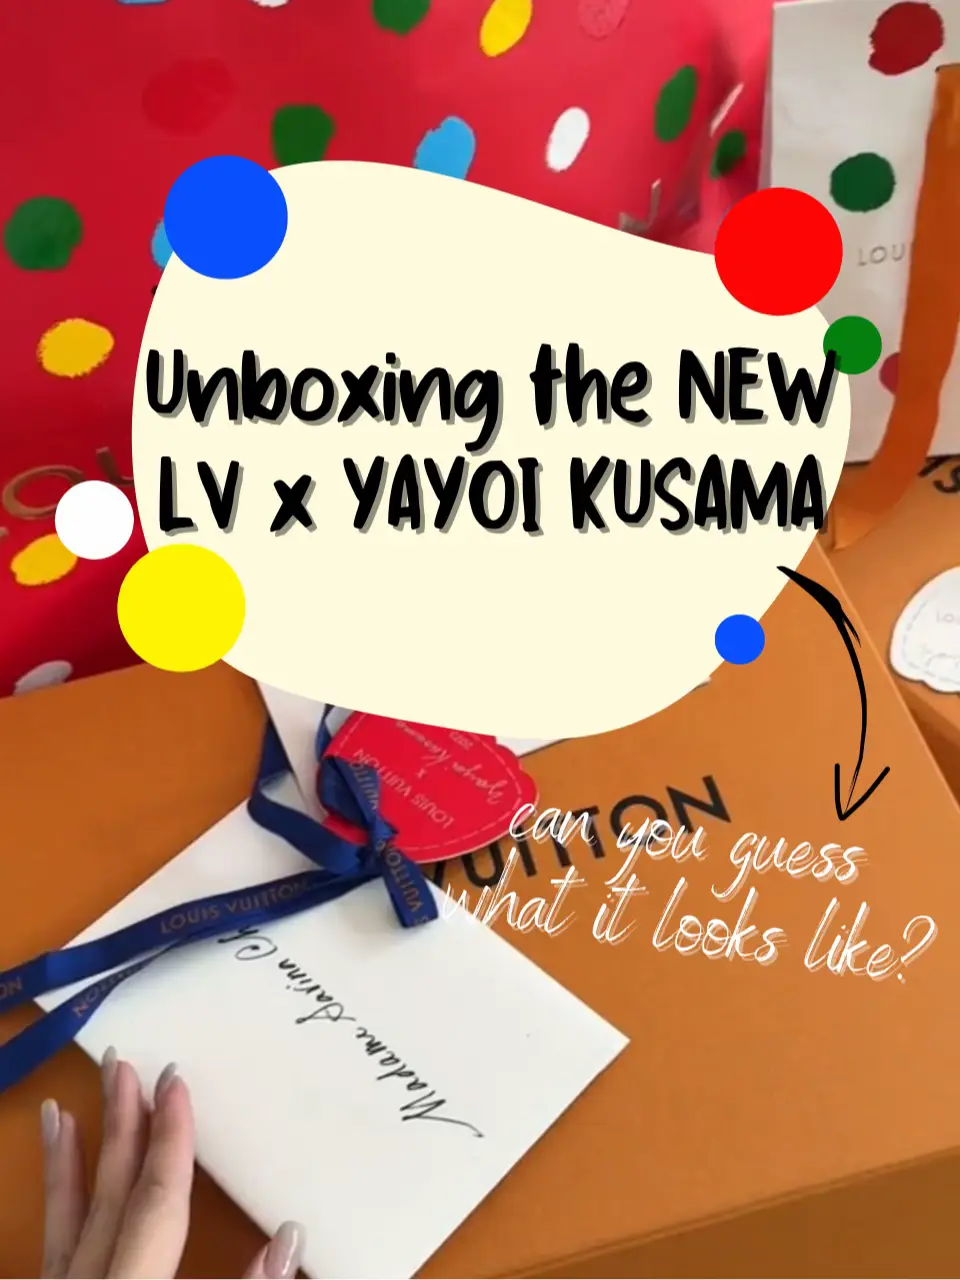 Louis Vuitton moves up a gear with its collaboration with Yayoi Kusama